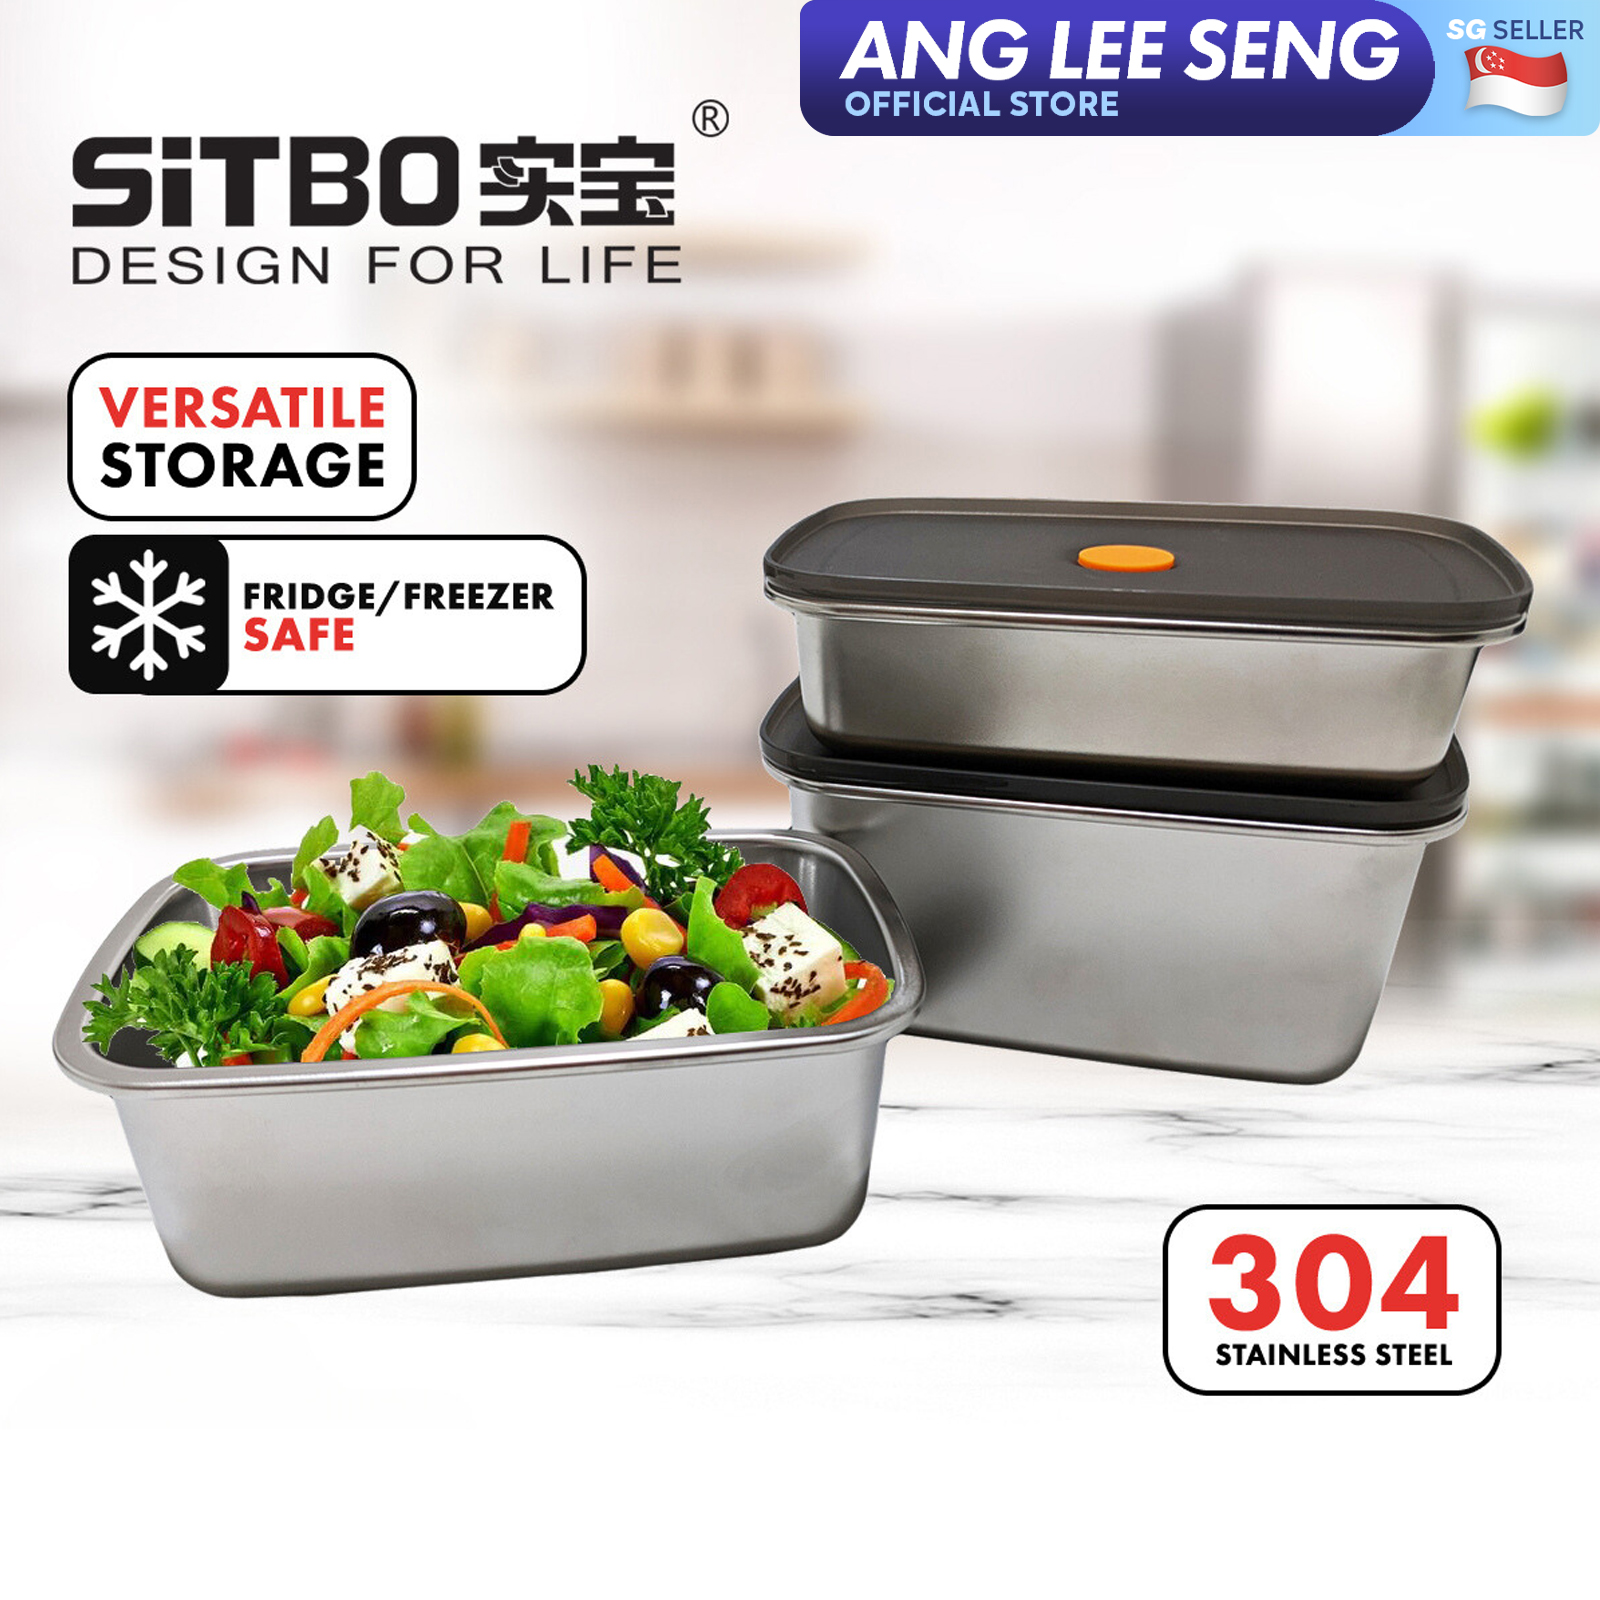 Sitbo 304 Stainless Steel Food Storage Meal Prep Container - Airtight, Stackable, Fridge/Freezer Safe